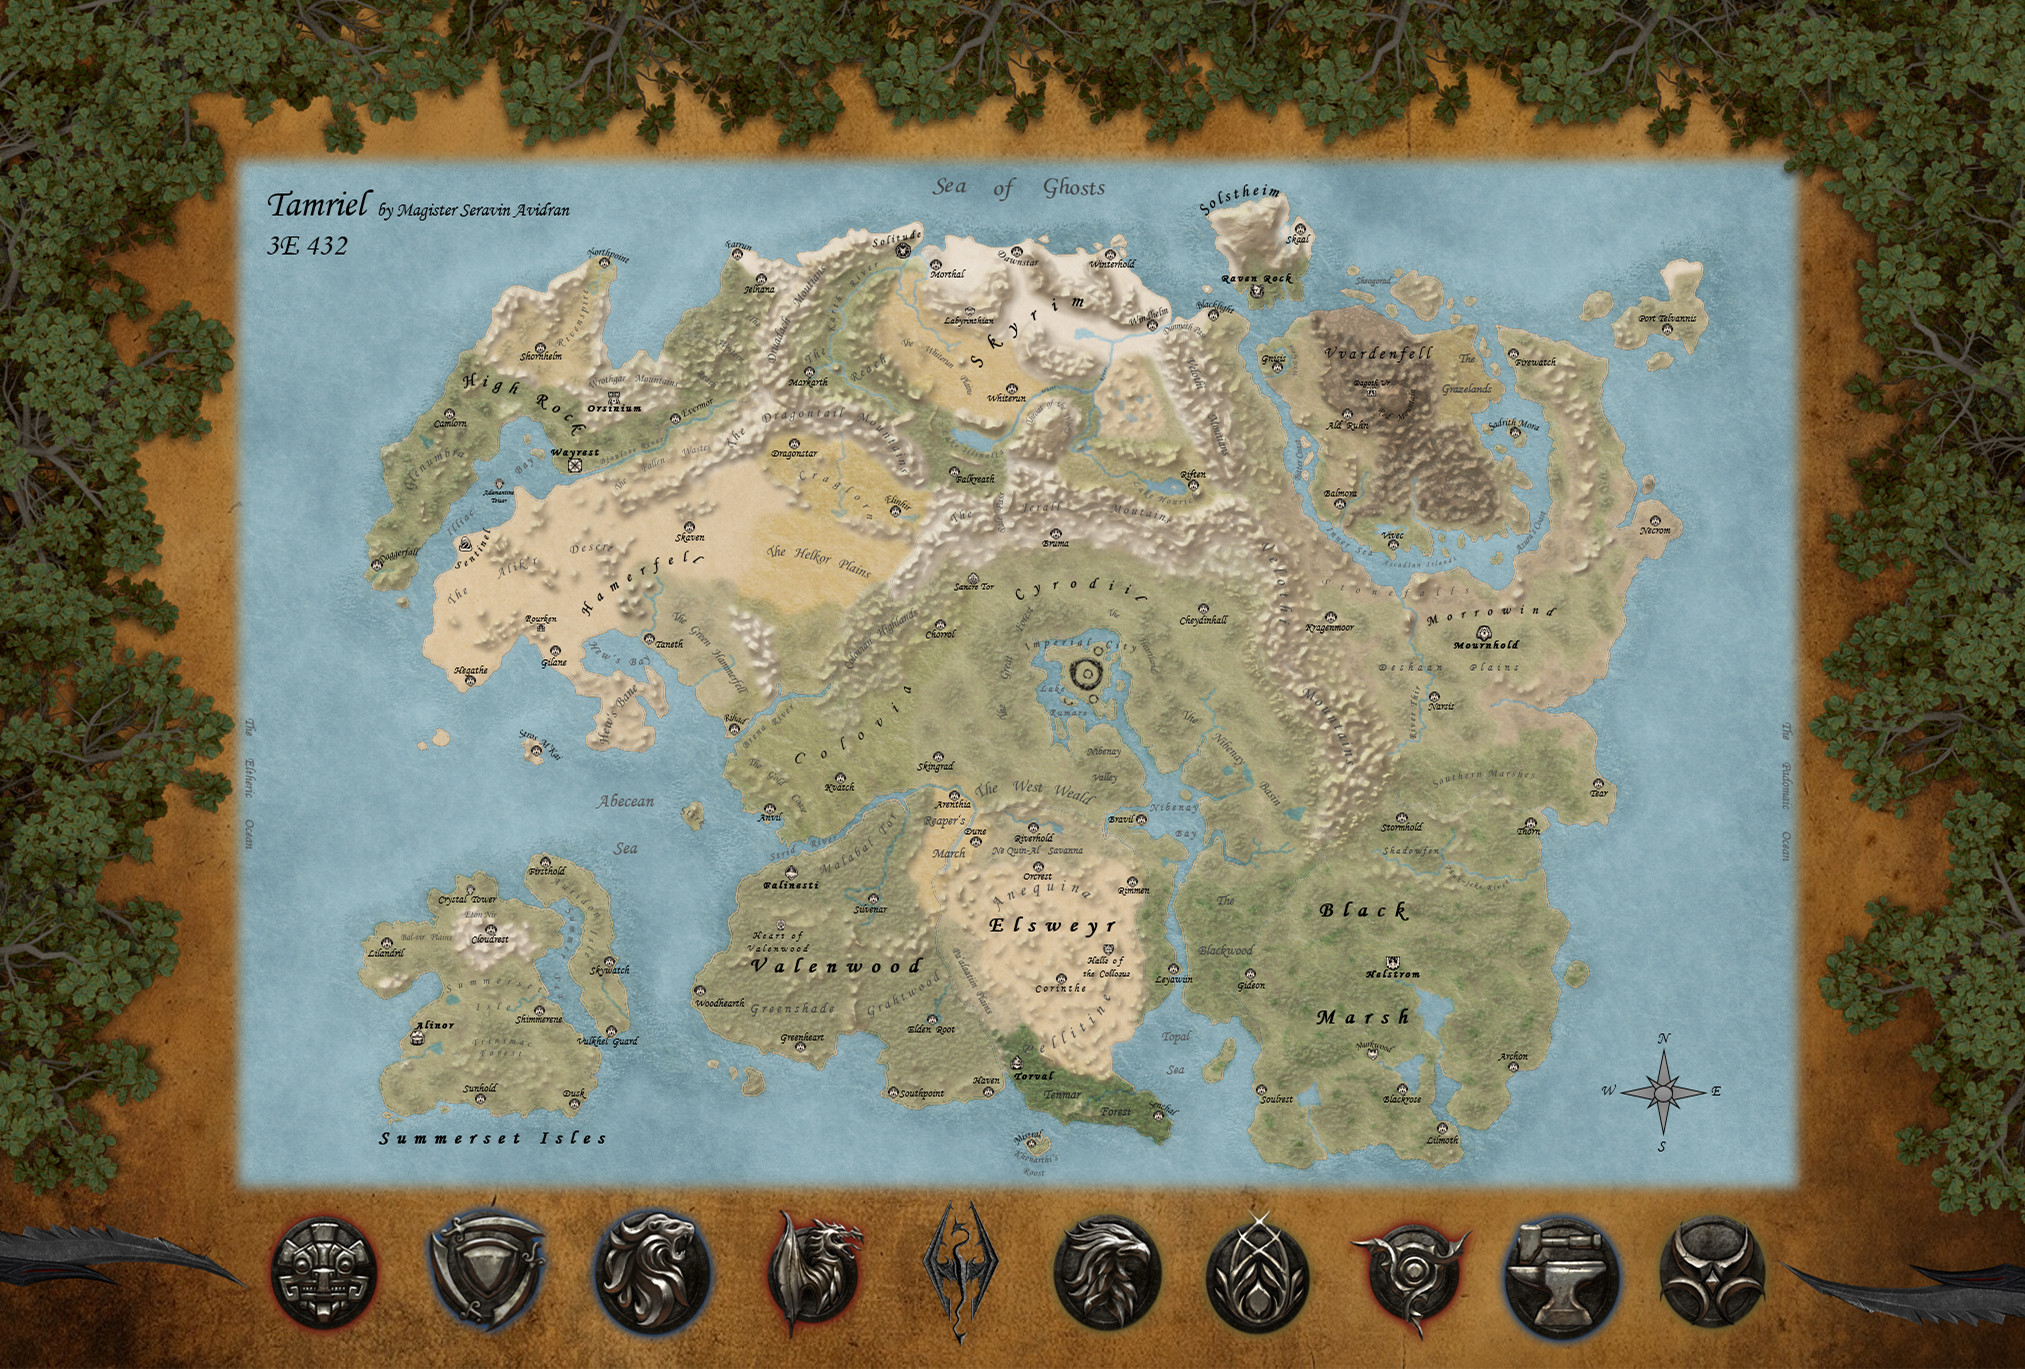 2025x1369 ... The Map of Tamriel by Watosh66